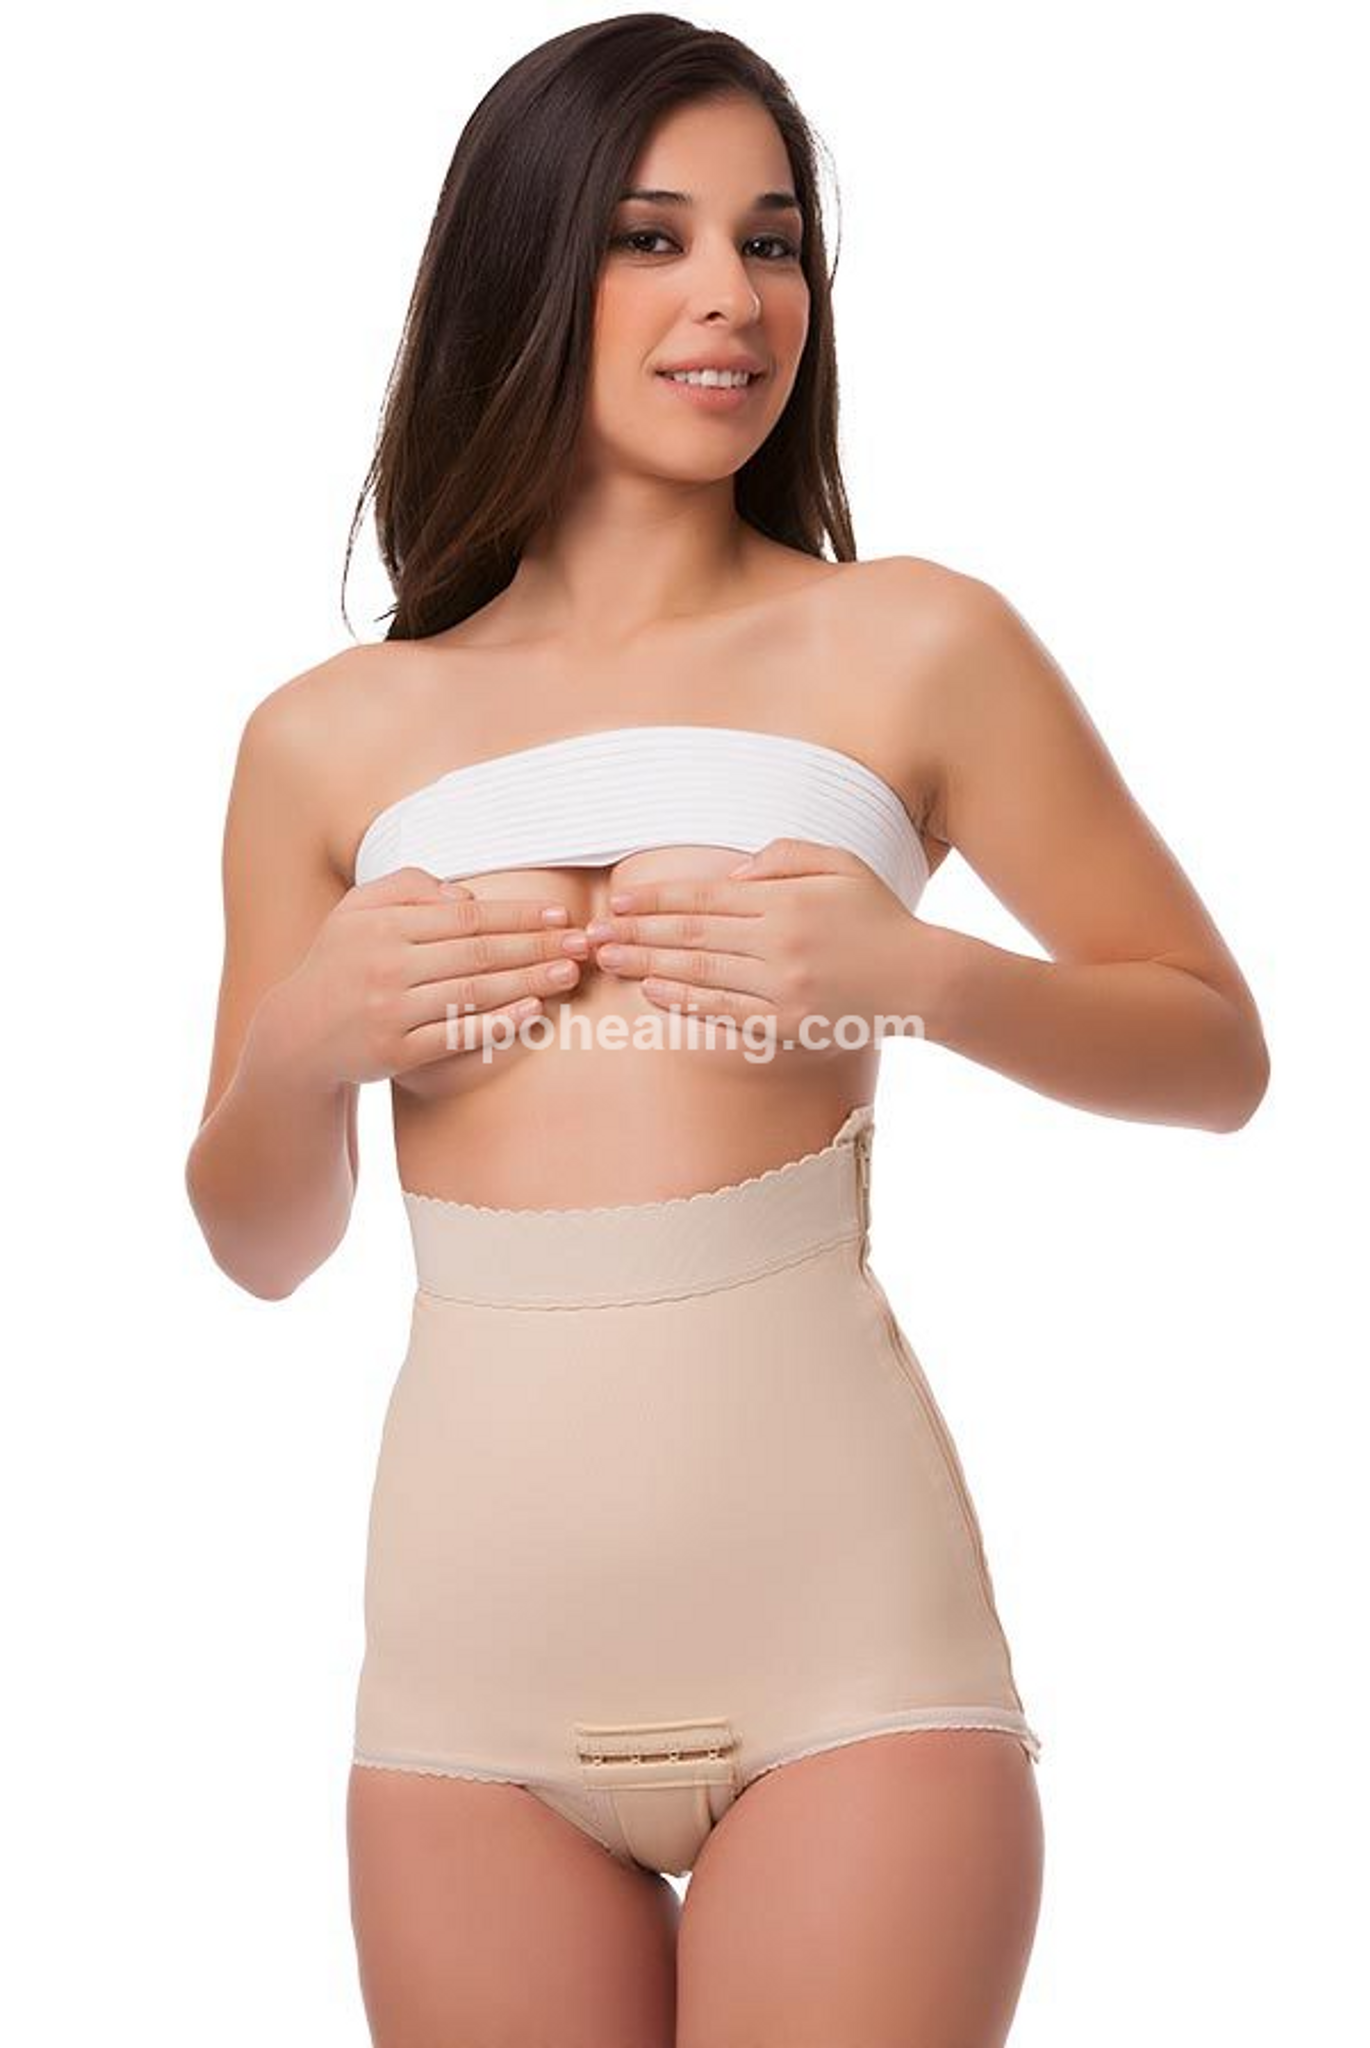 Implant Stabilizer BREAST Band QUALITY POST SURGICAL 3INCH WIDE by USA  Shpwr Inc - Liposuction Healing Foam, Lipo Foam